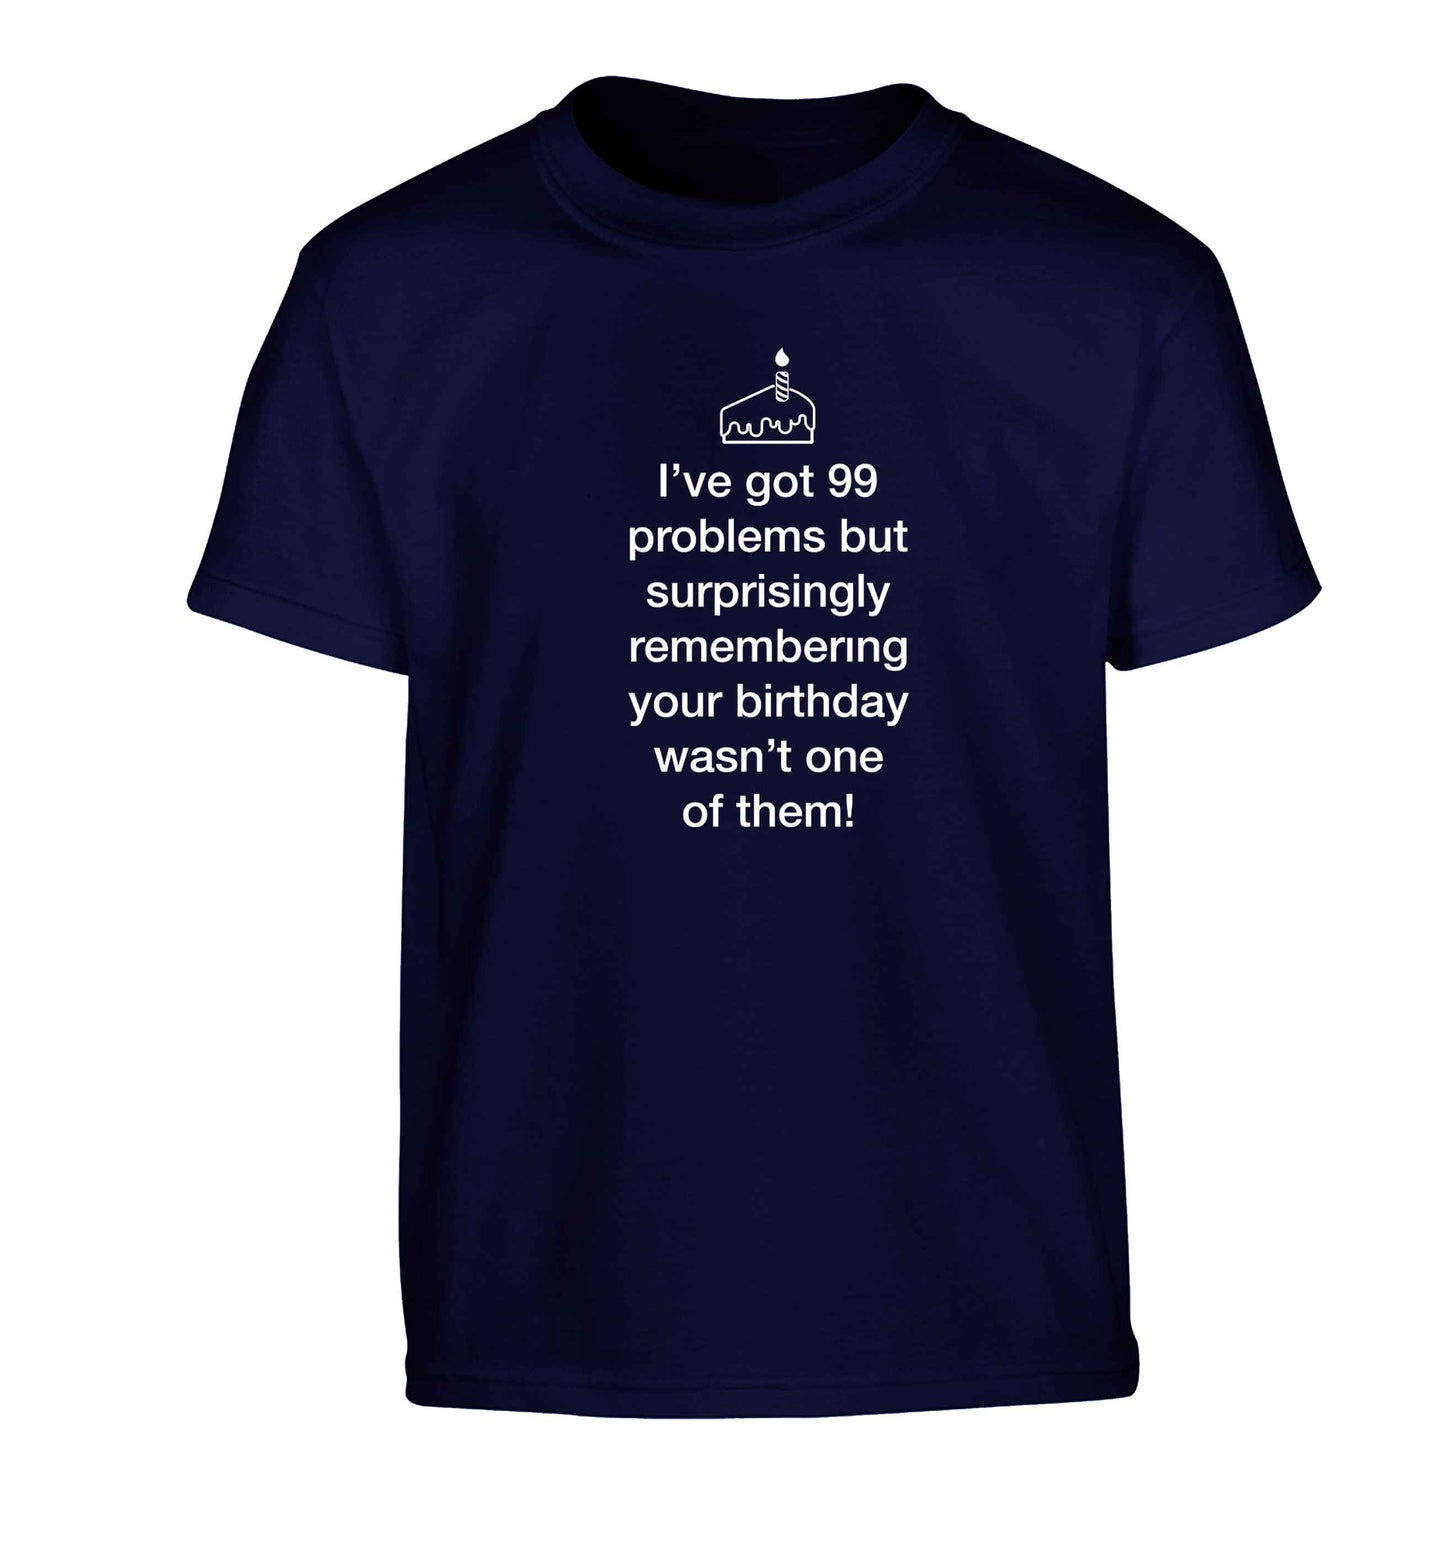 I've got 99 problems but surprisingly remembering your birthday wasn't one of them! Children's navy Tshirt 12-13 Years